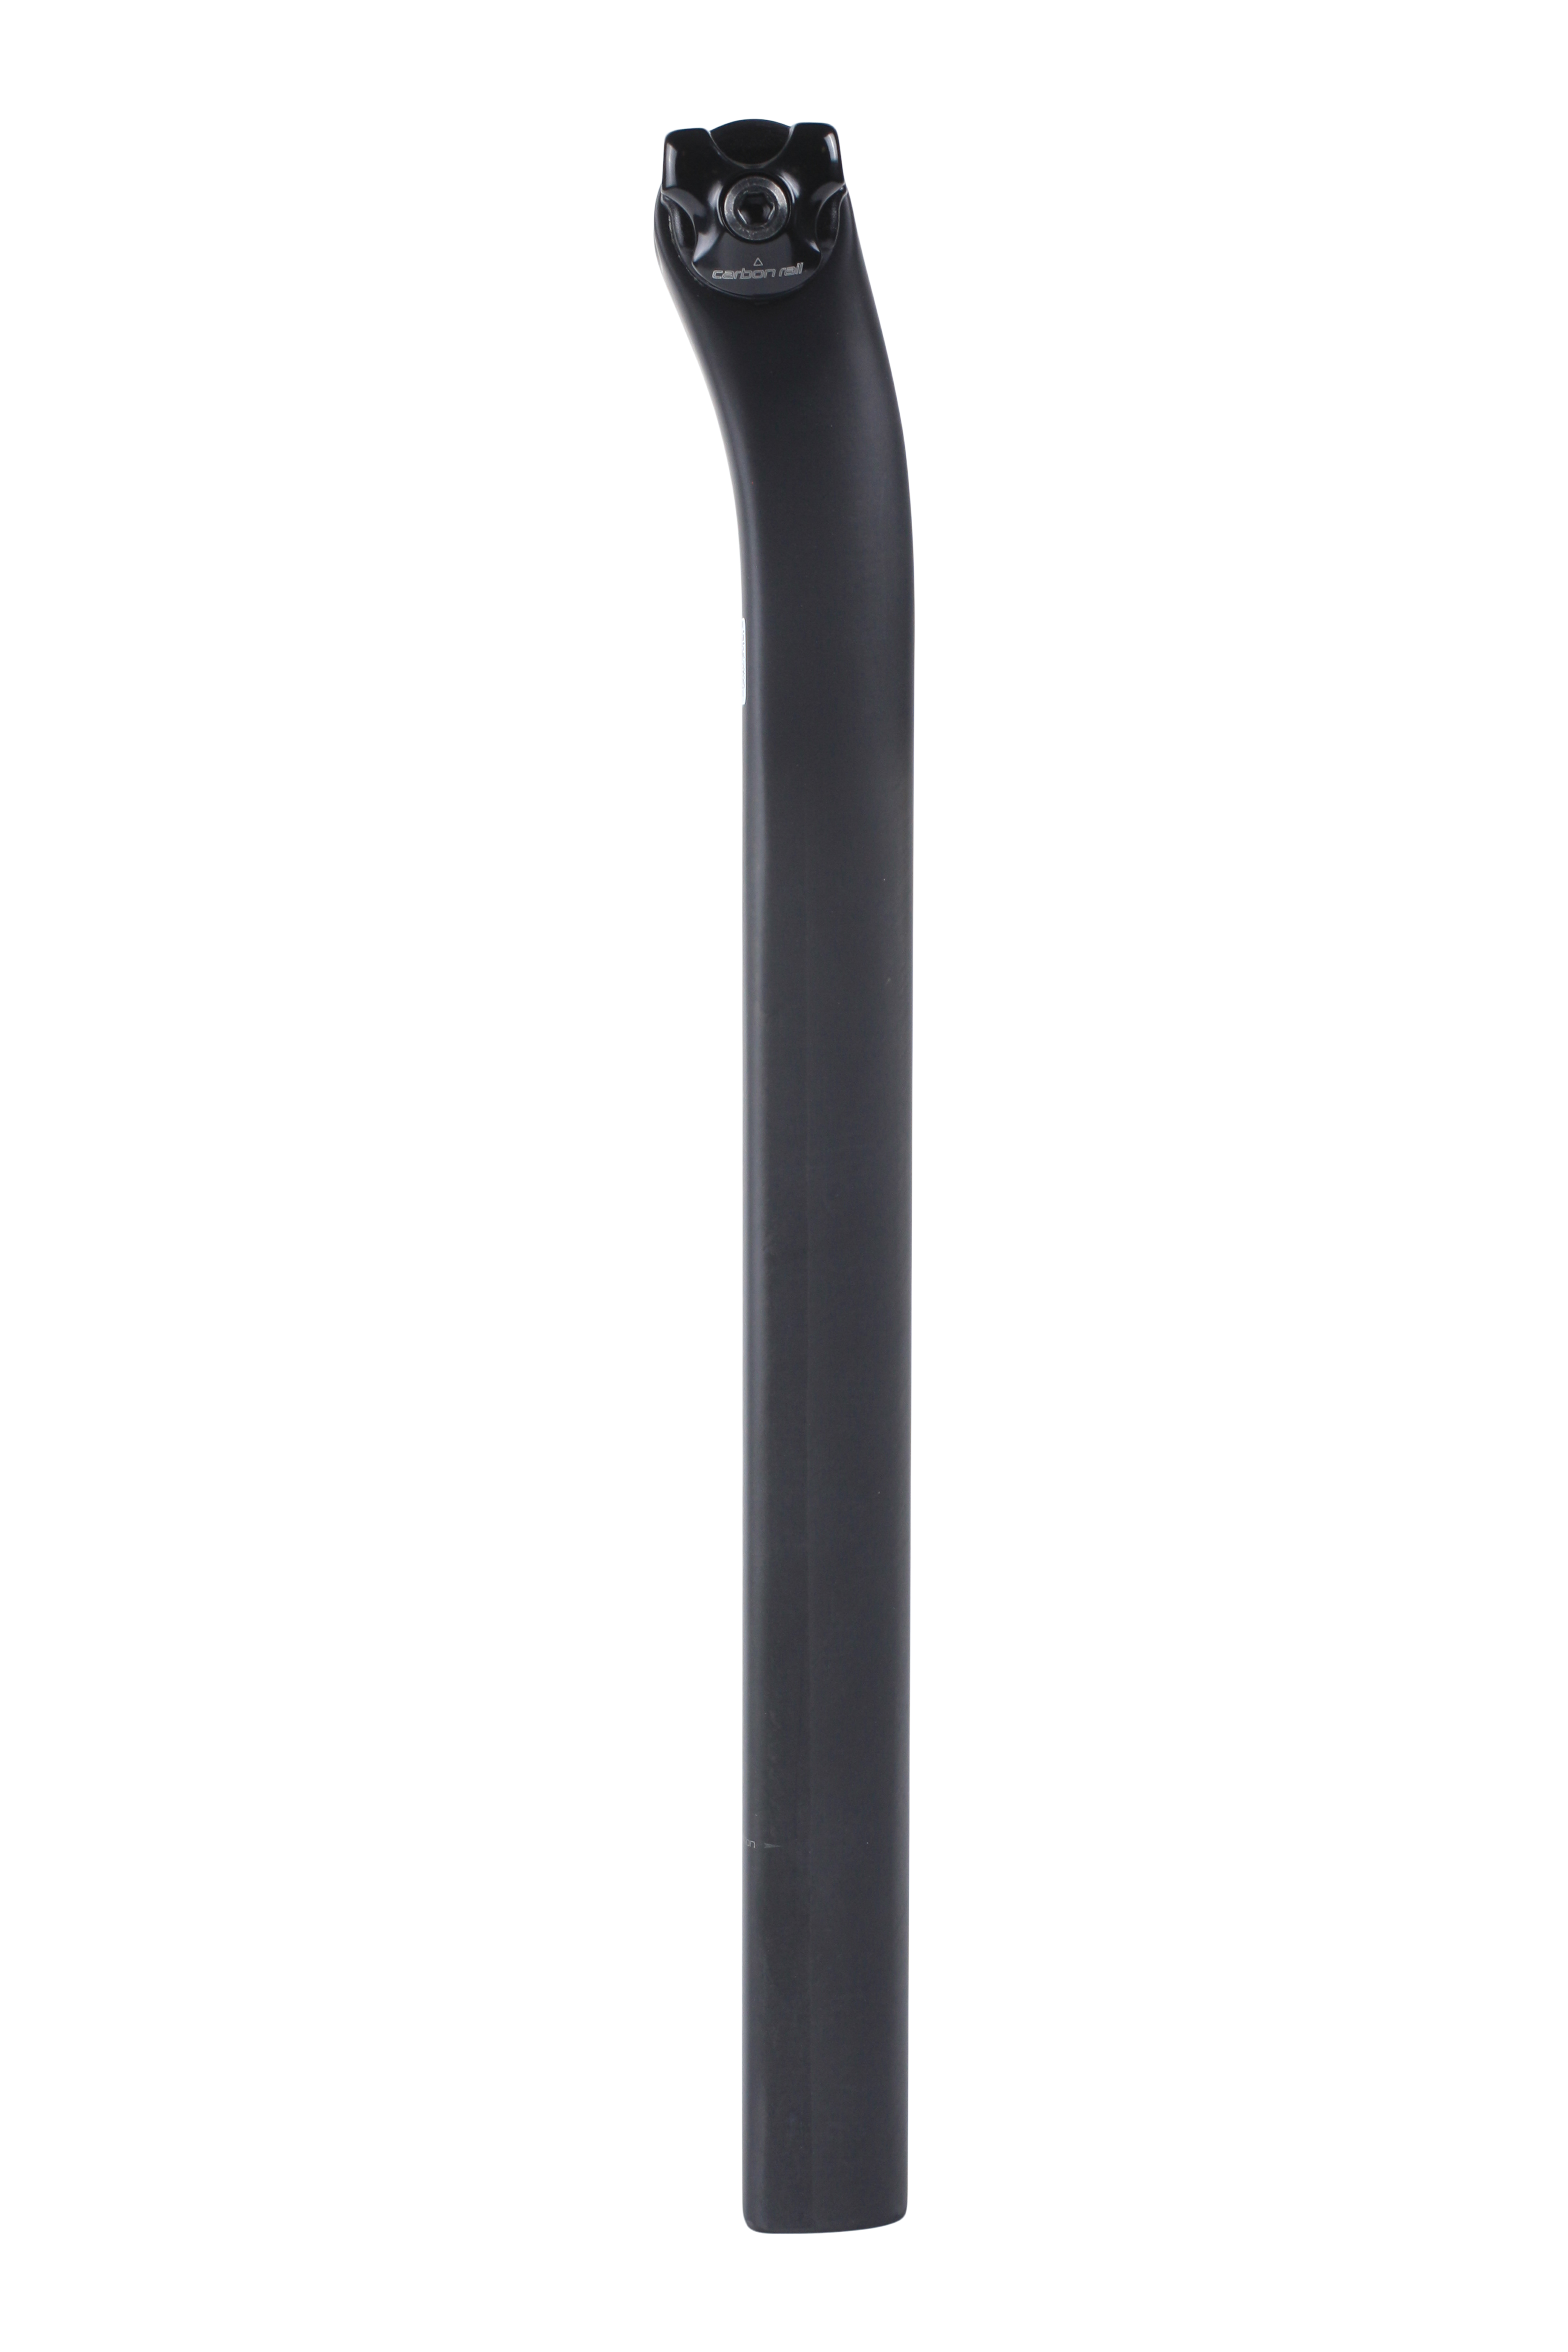 S-Works FACT Carbon Tarmac SL6 Seat Post, 20mm Offset, 380mm